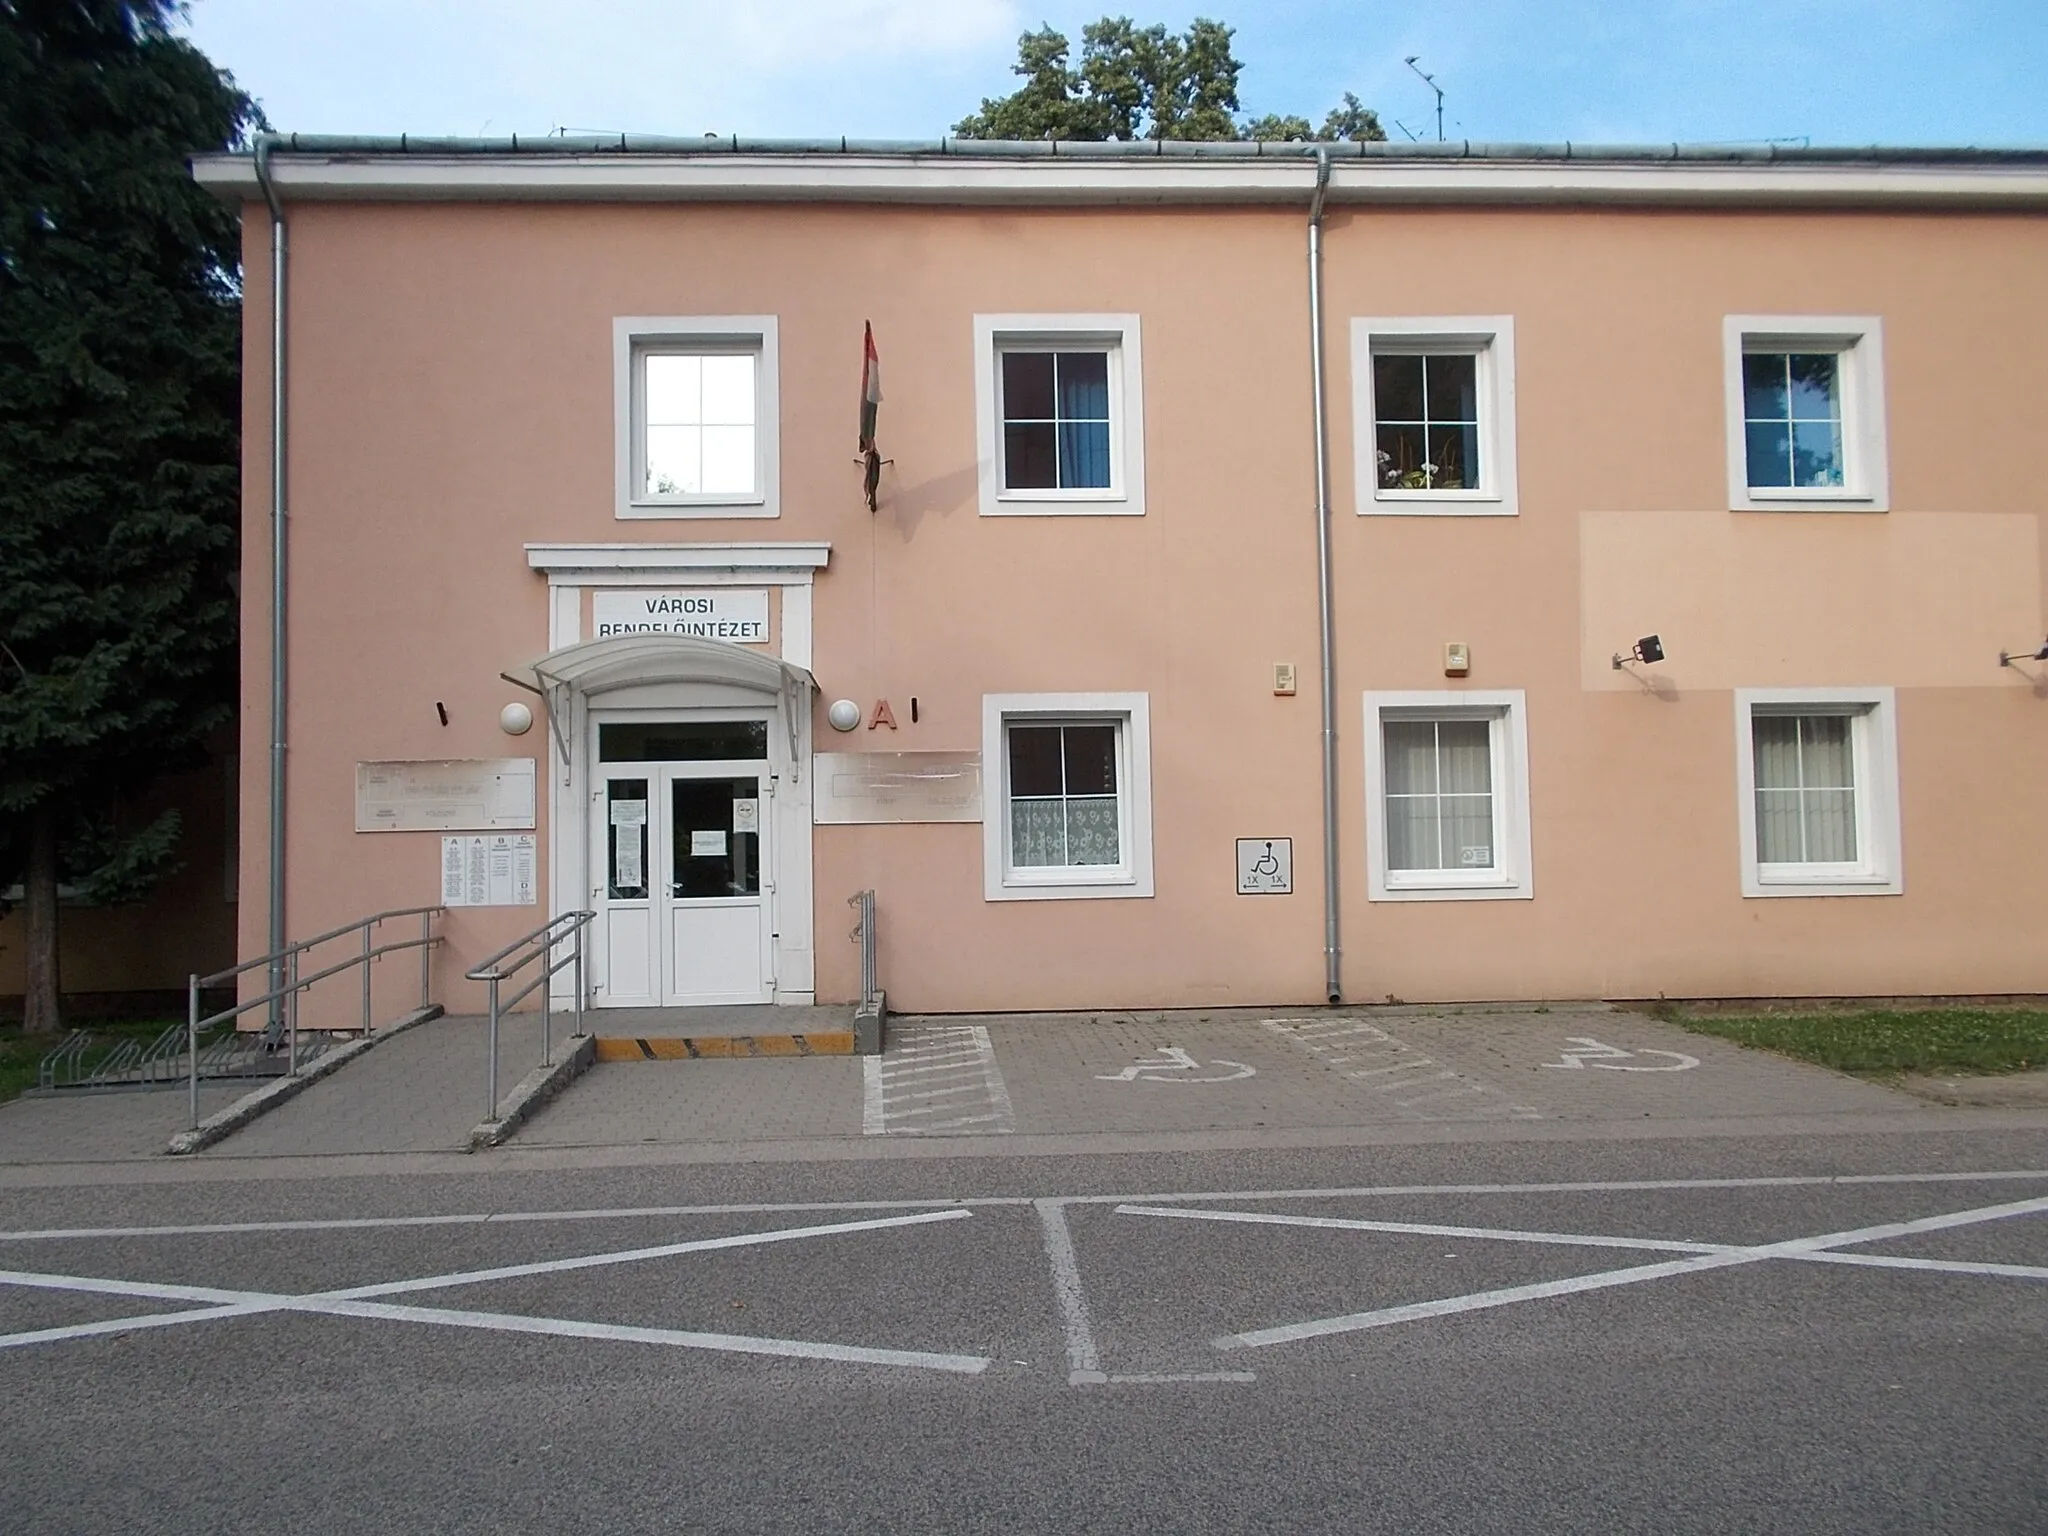 Photo showing: : City Clinic? General Practice. AND Veszprém County Tax and Customs Directorate  of the National Tax and Customs Administration of Hungary (NTCA) - Semmelweis utca and Petőfi Sándor utca corner, Ajka, Veszprém County, Hungary.